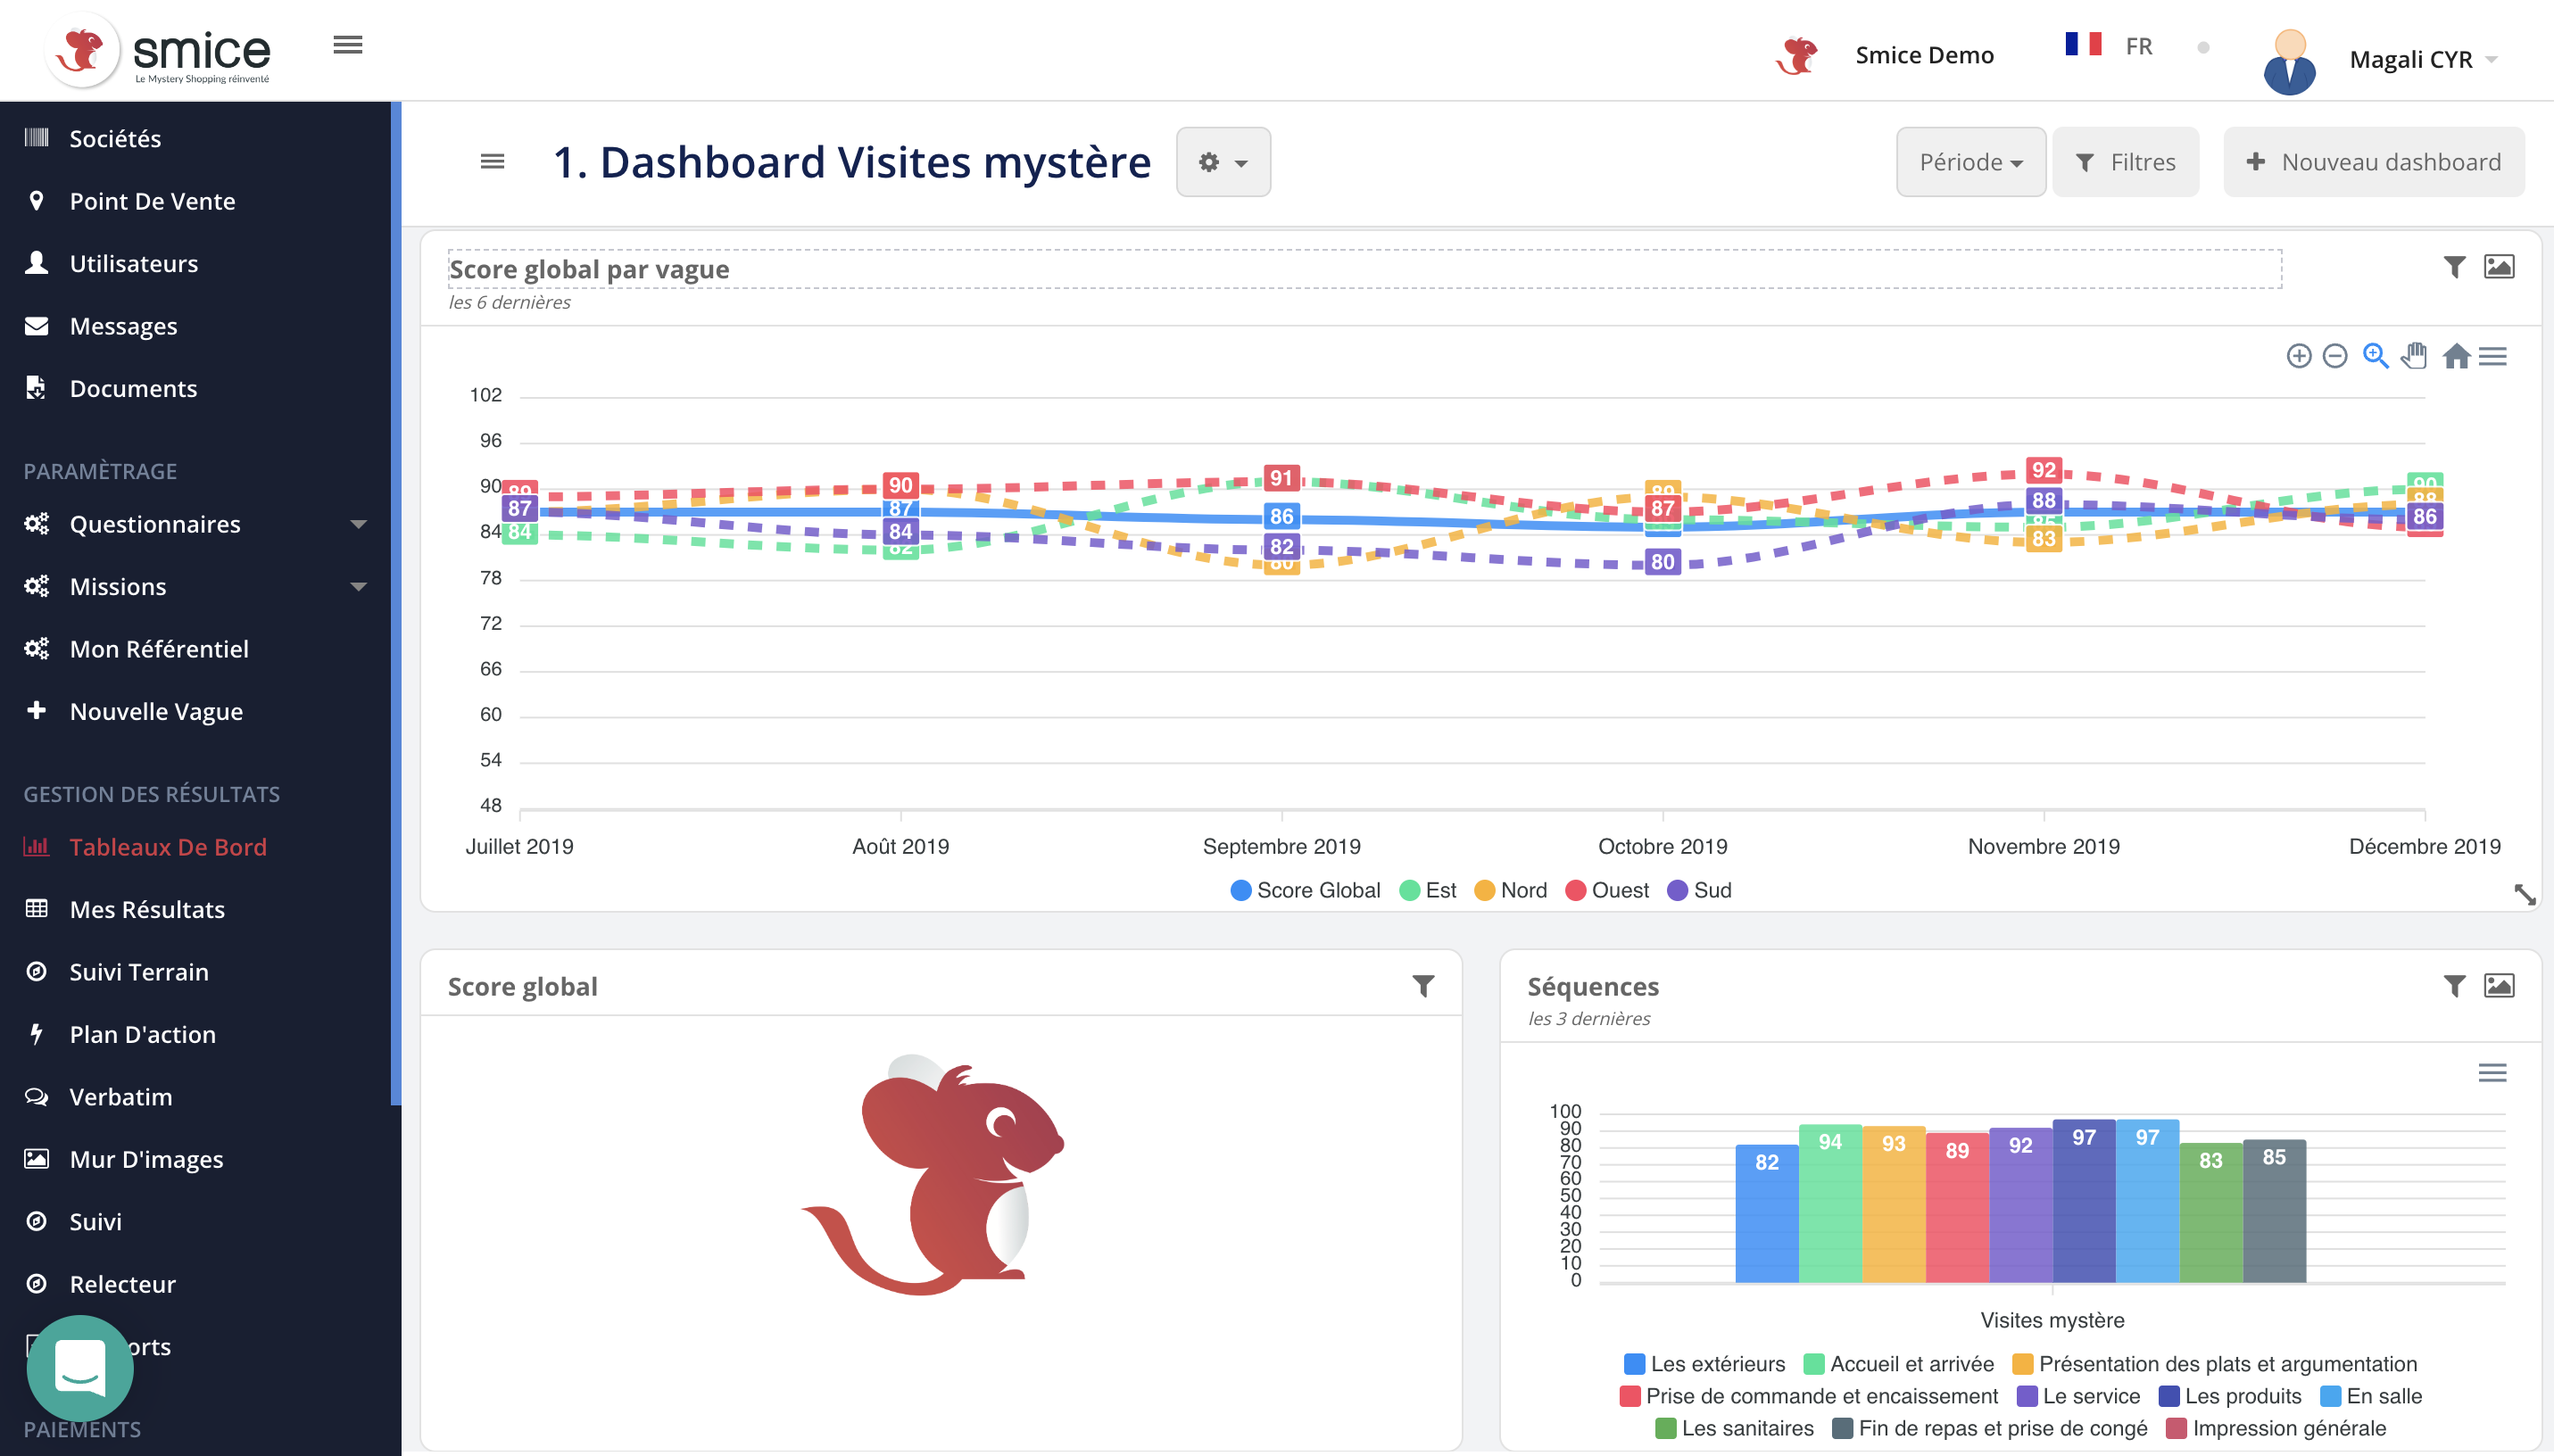 Create your own dashboard to visualize audits data restitution and share them easily. Thousands to cross criterias, steps, areas and display through efficient widgets